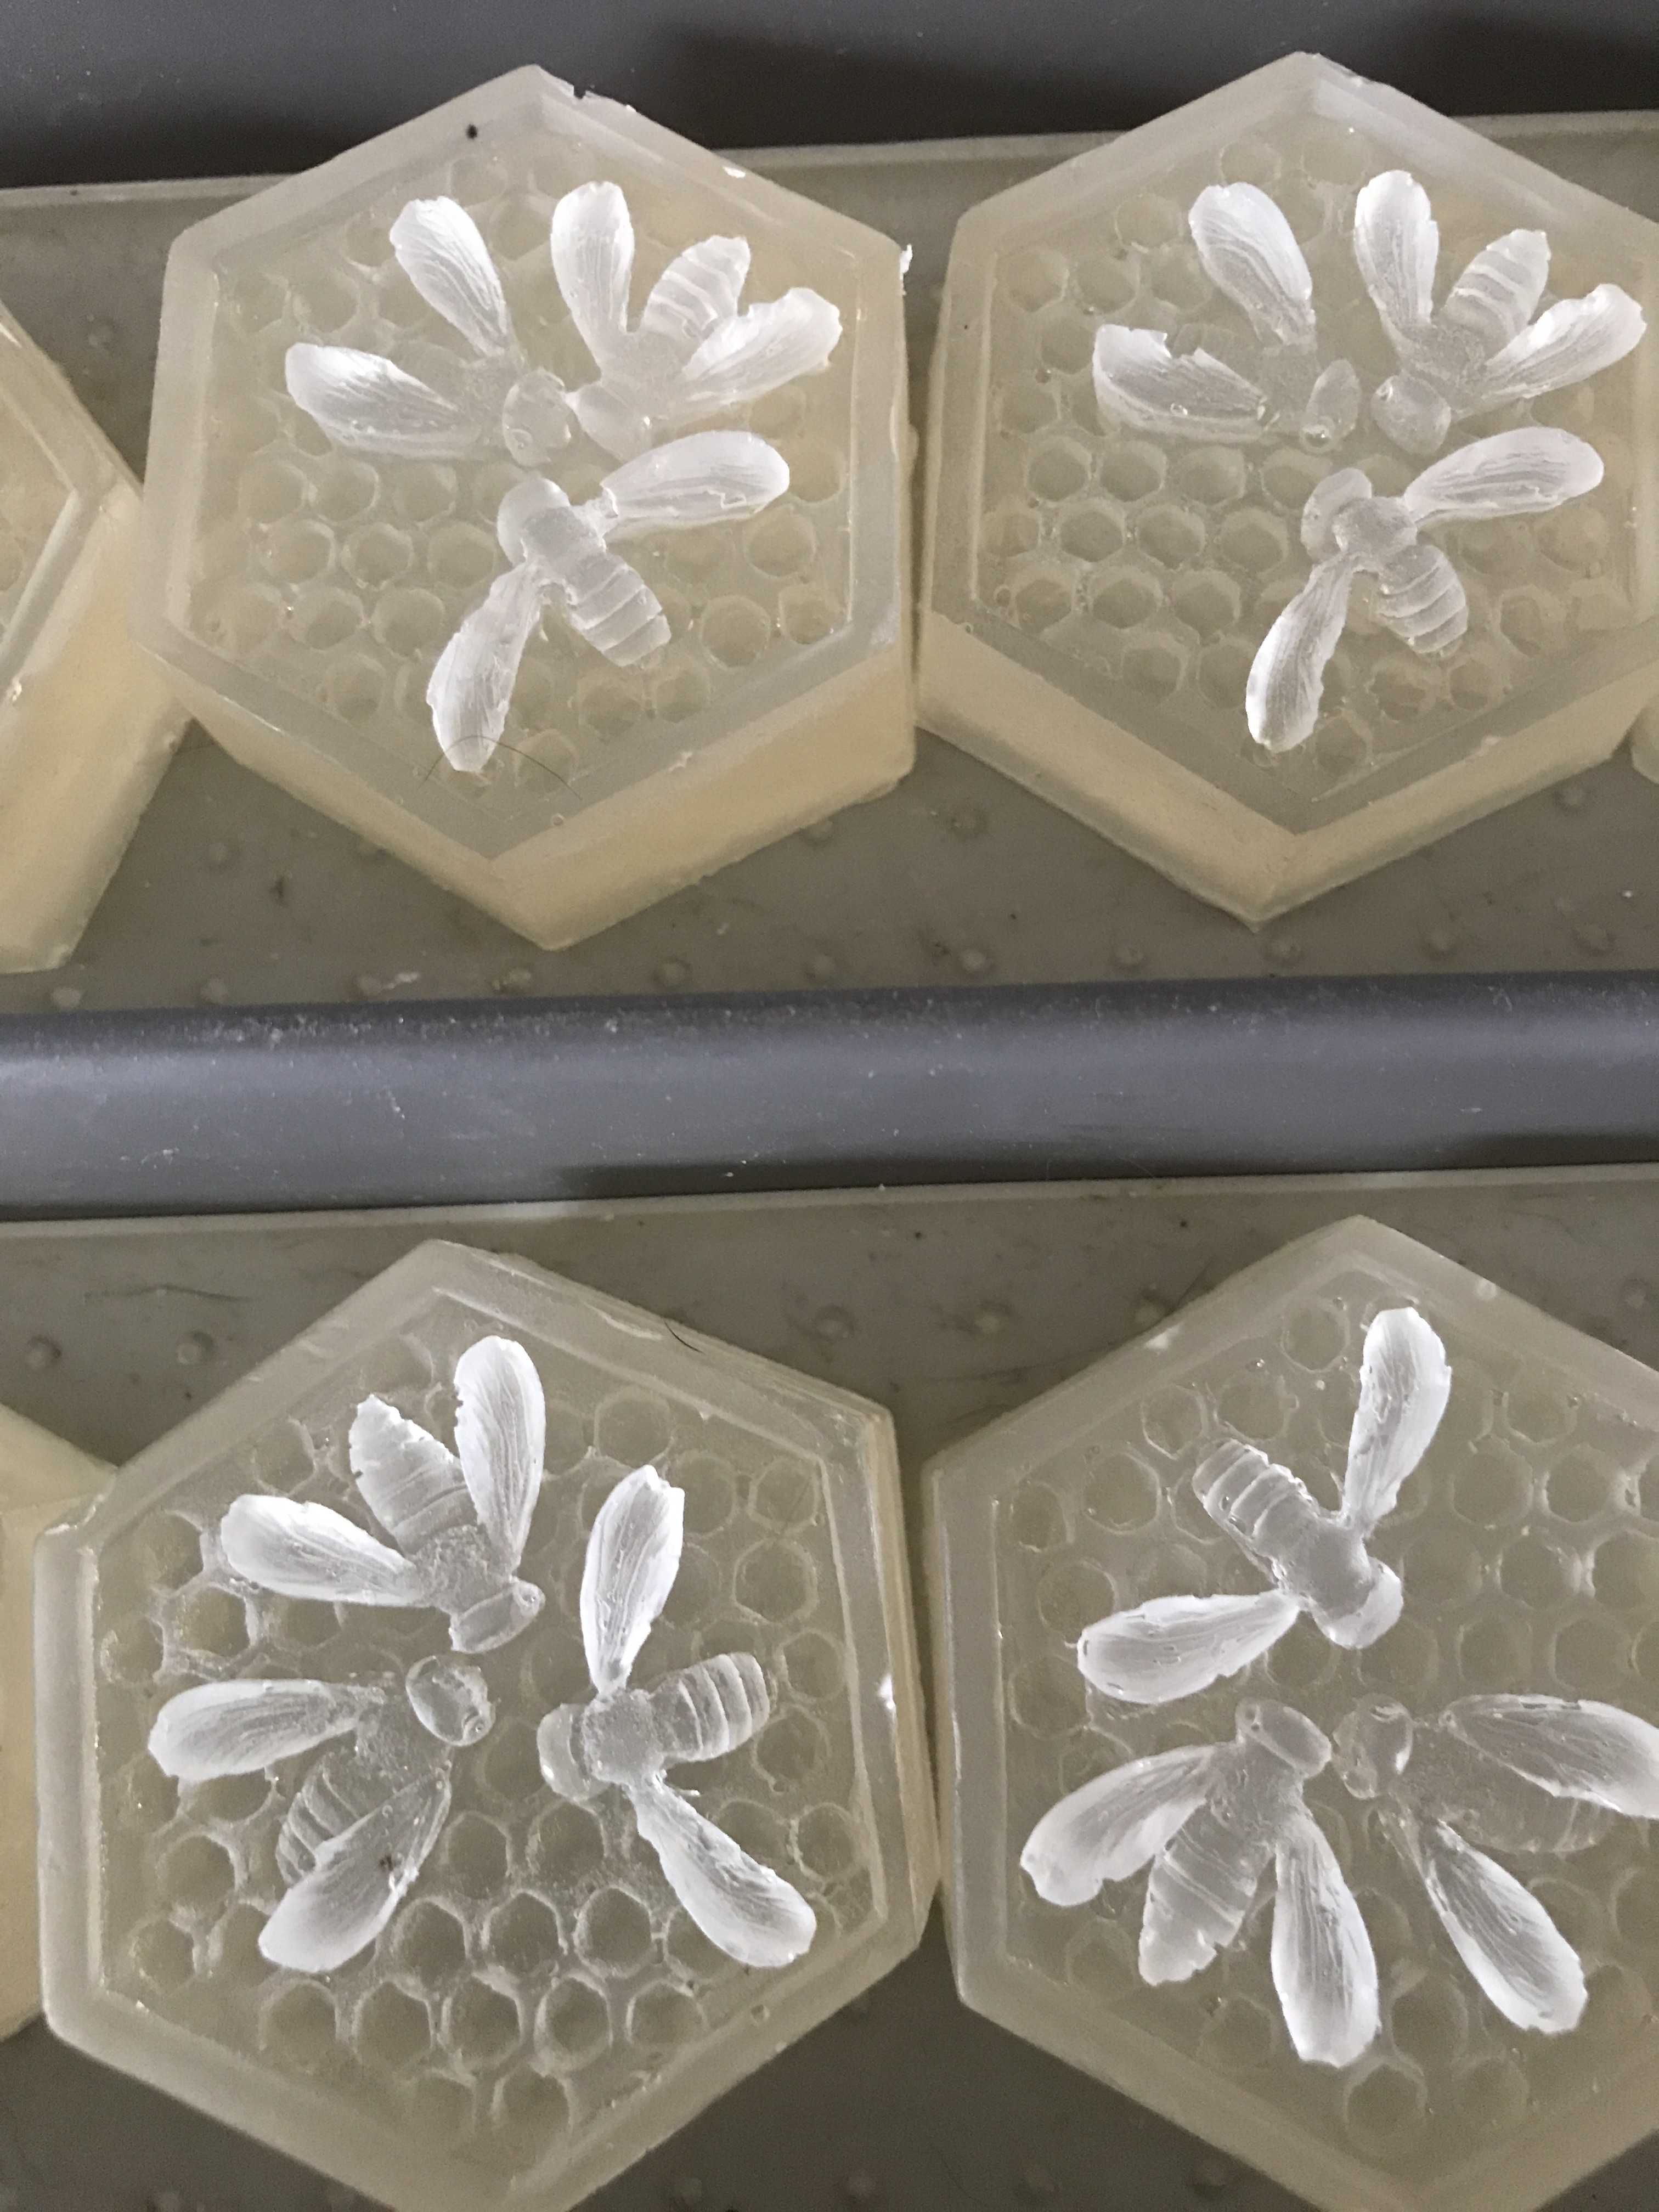 Pictures of honeycomb soaps